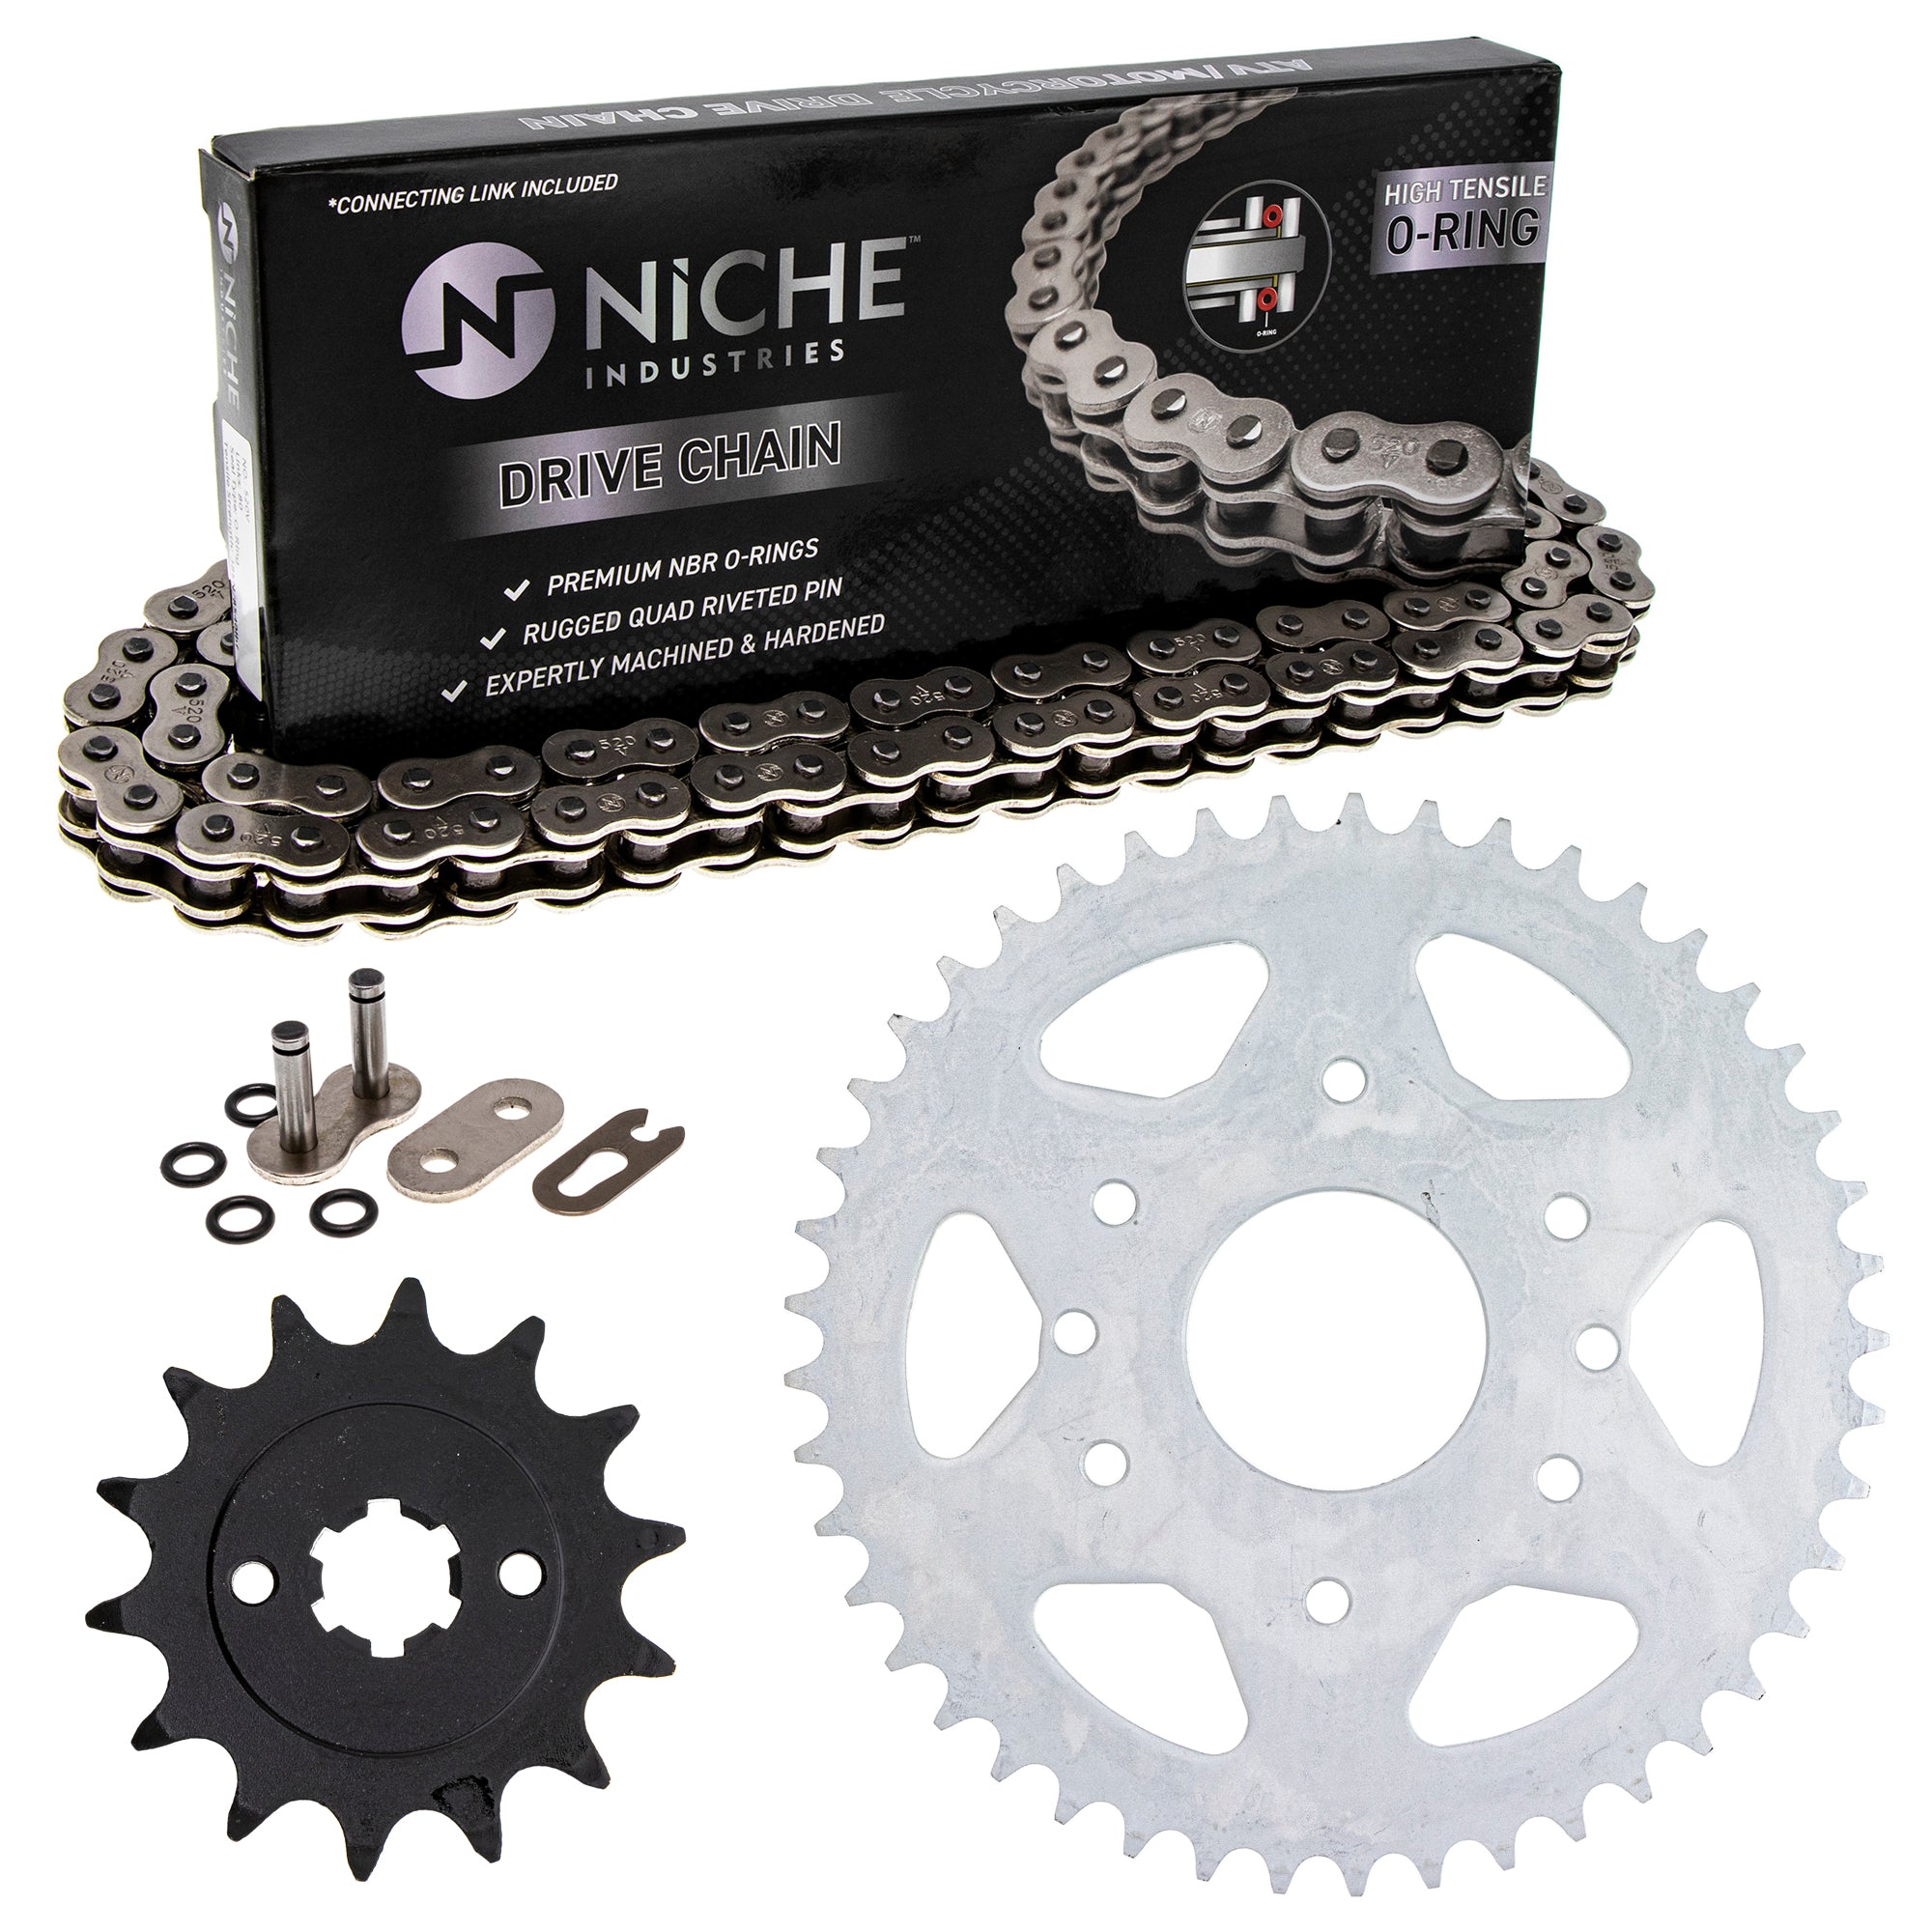 Drive Sprockets & Chain Kit for zOTHER KTM WR250 WR125 TE250i TE250 50310165118 NICHE MK1004294